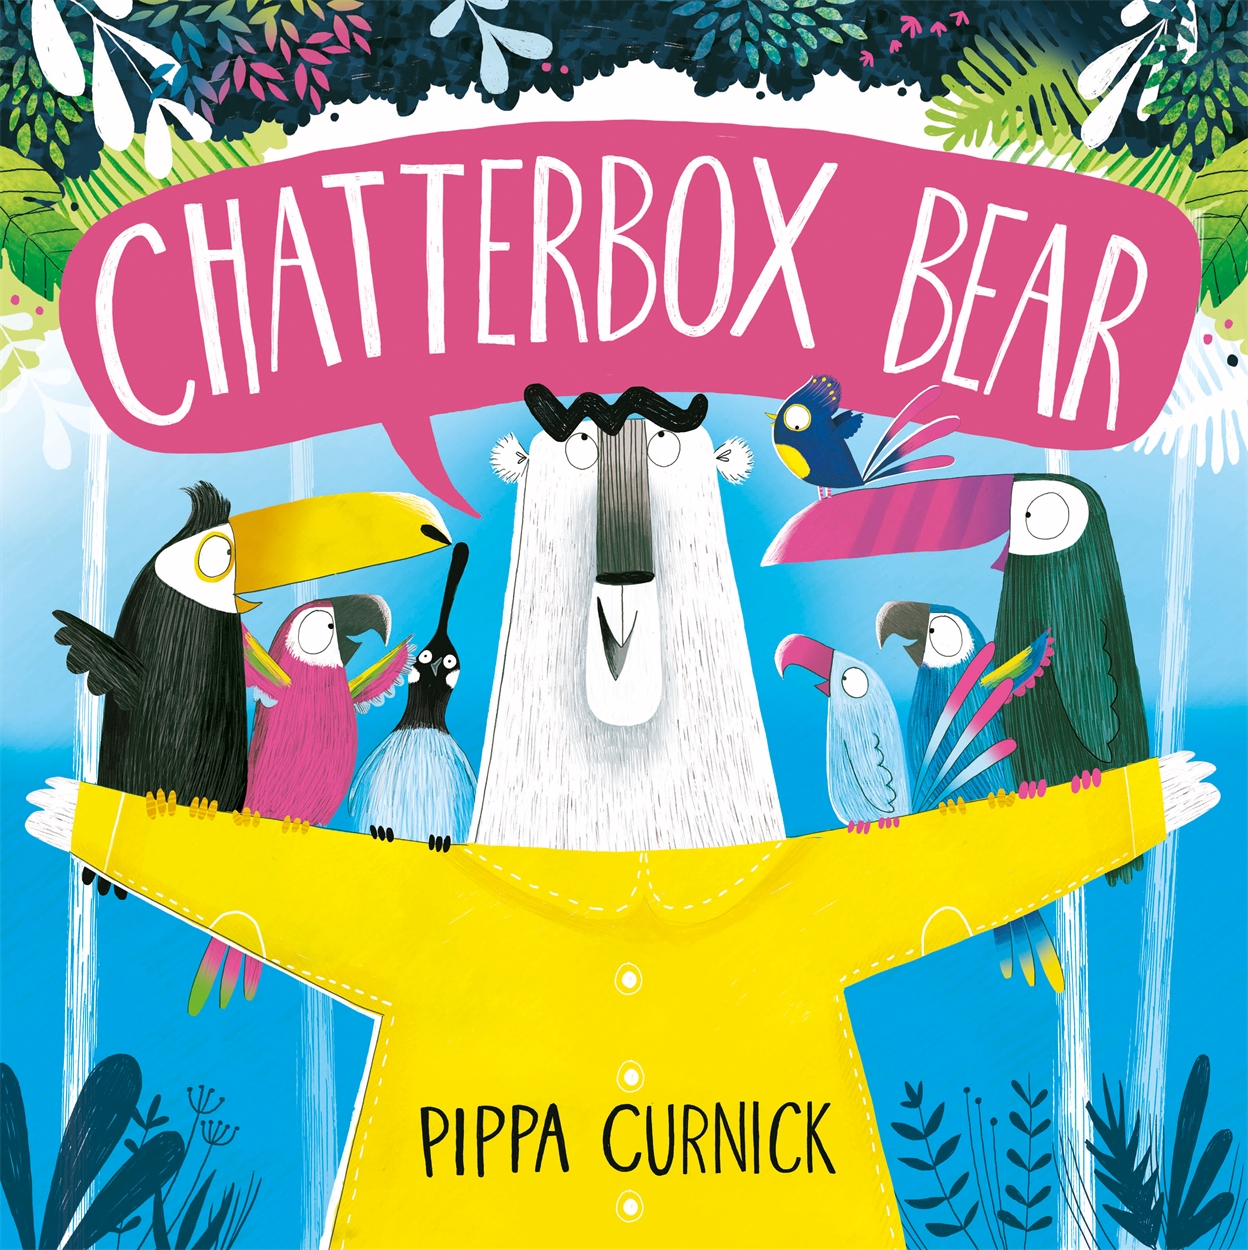 Chatterbox Bear by Pippa Curnick - Hachette Childrens UK